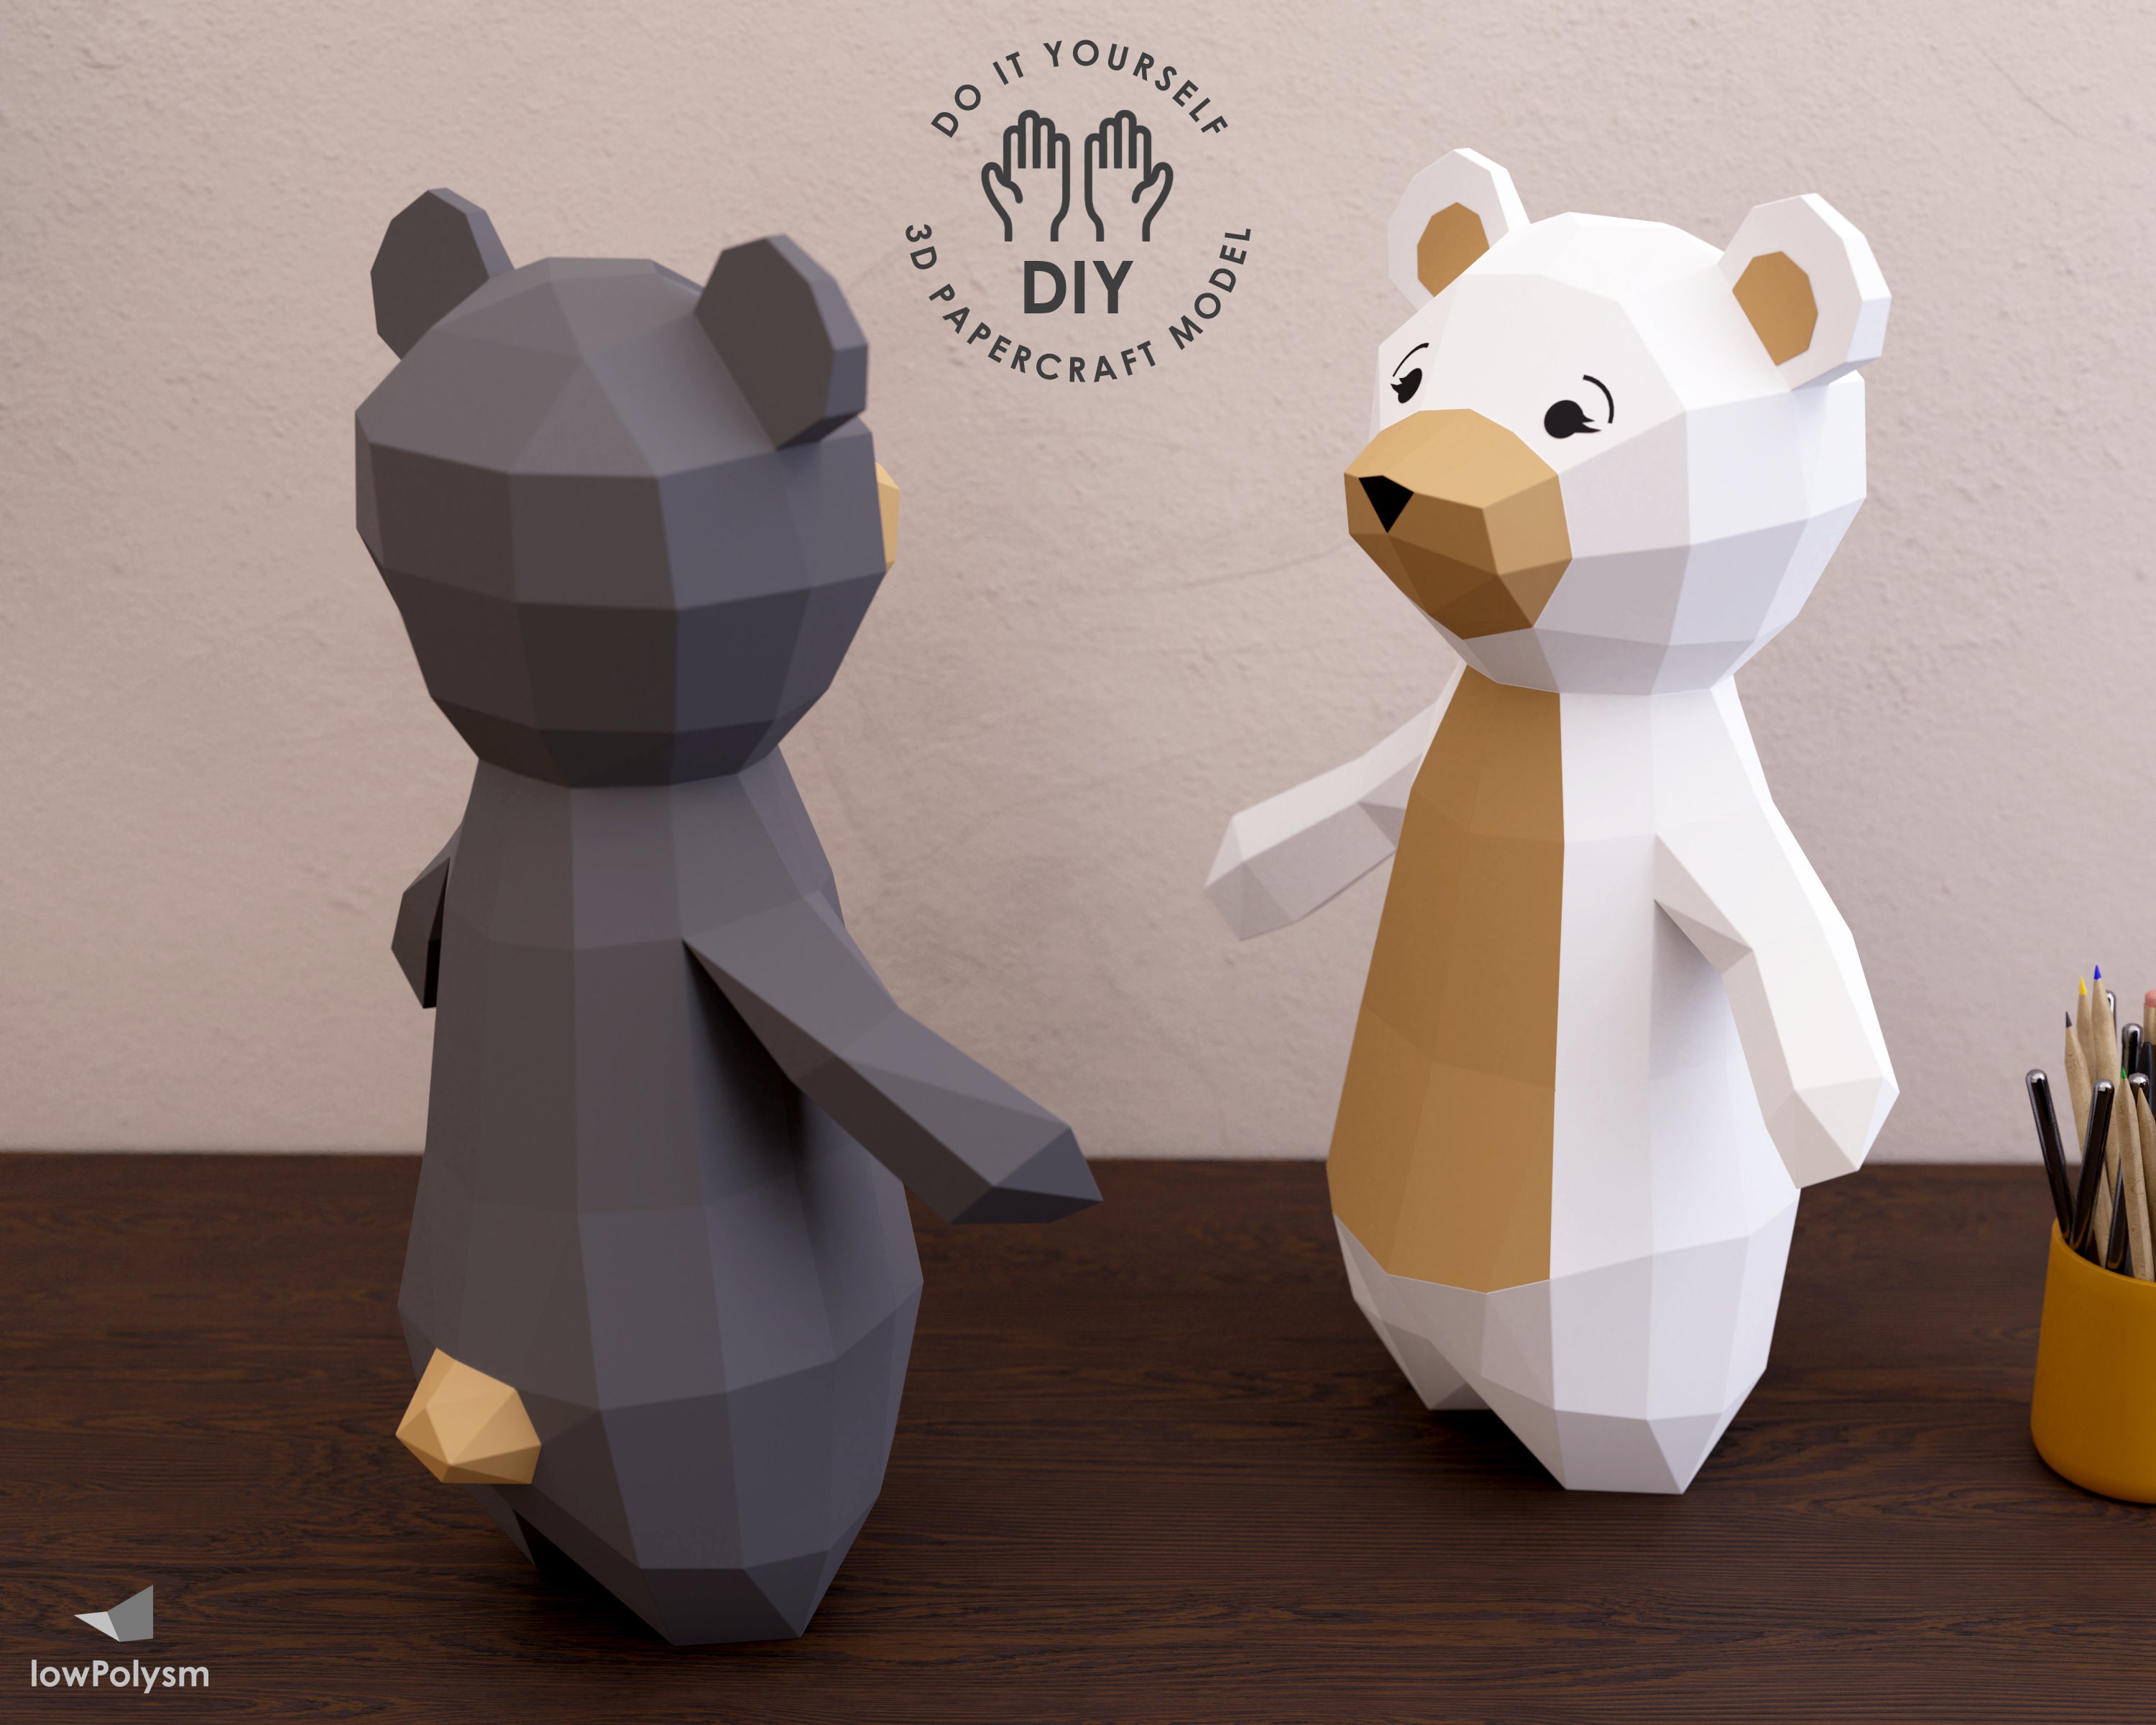 Gray Transfer Paper Graphite Paper  Wooden Teddy Bear - The Wooden Teddy  Bear, Inc